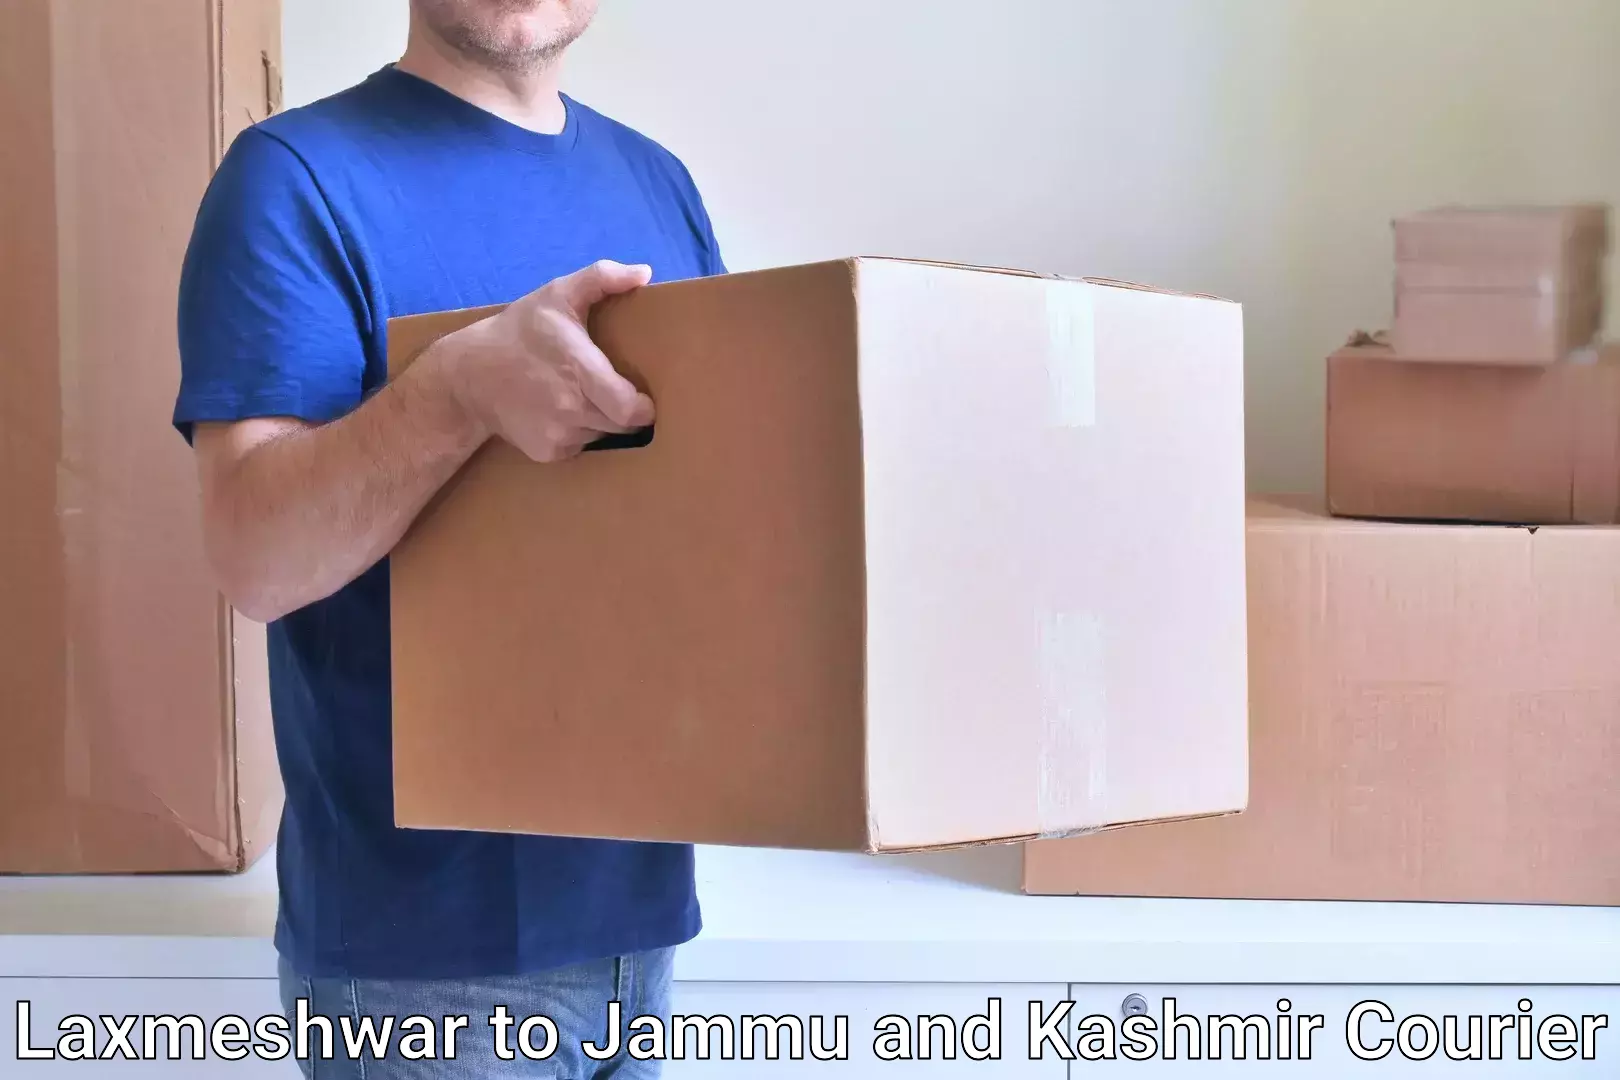 Holiday shipping services Laxmeshwar to Pulwama